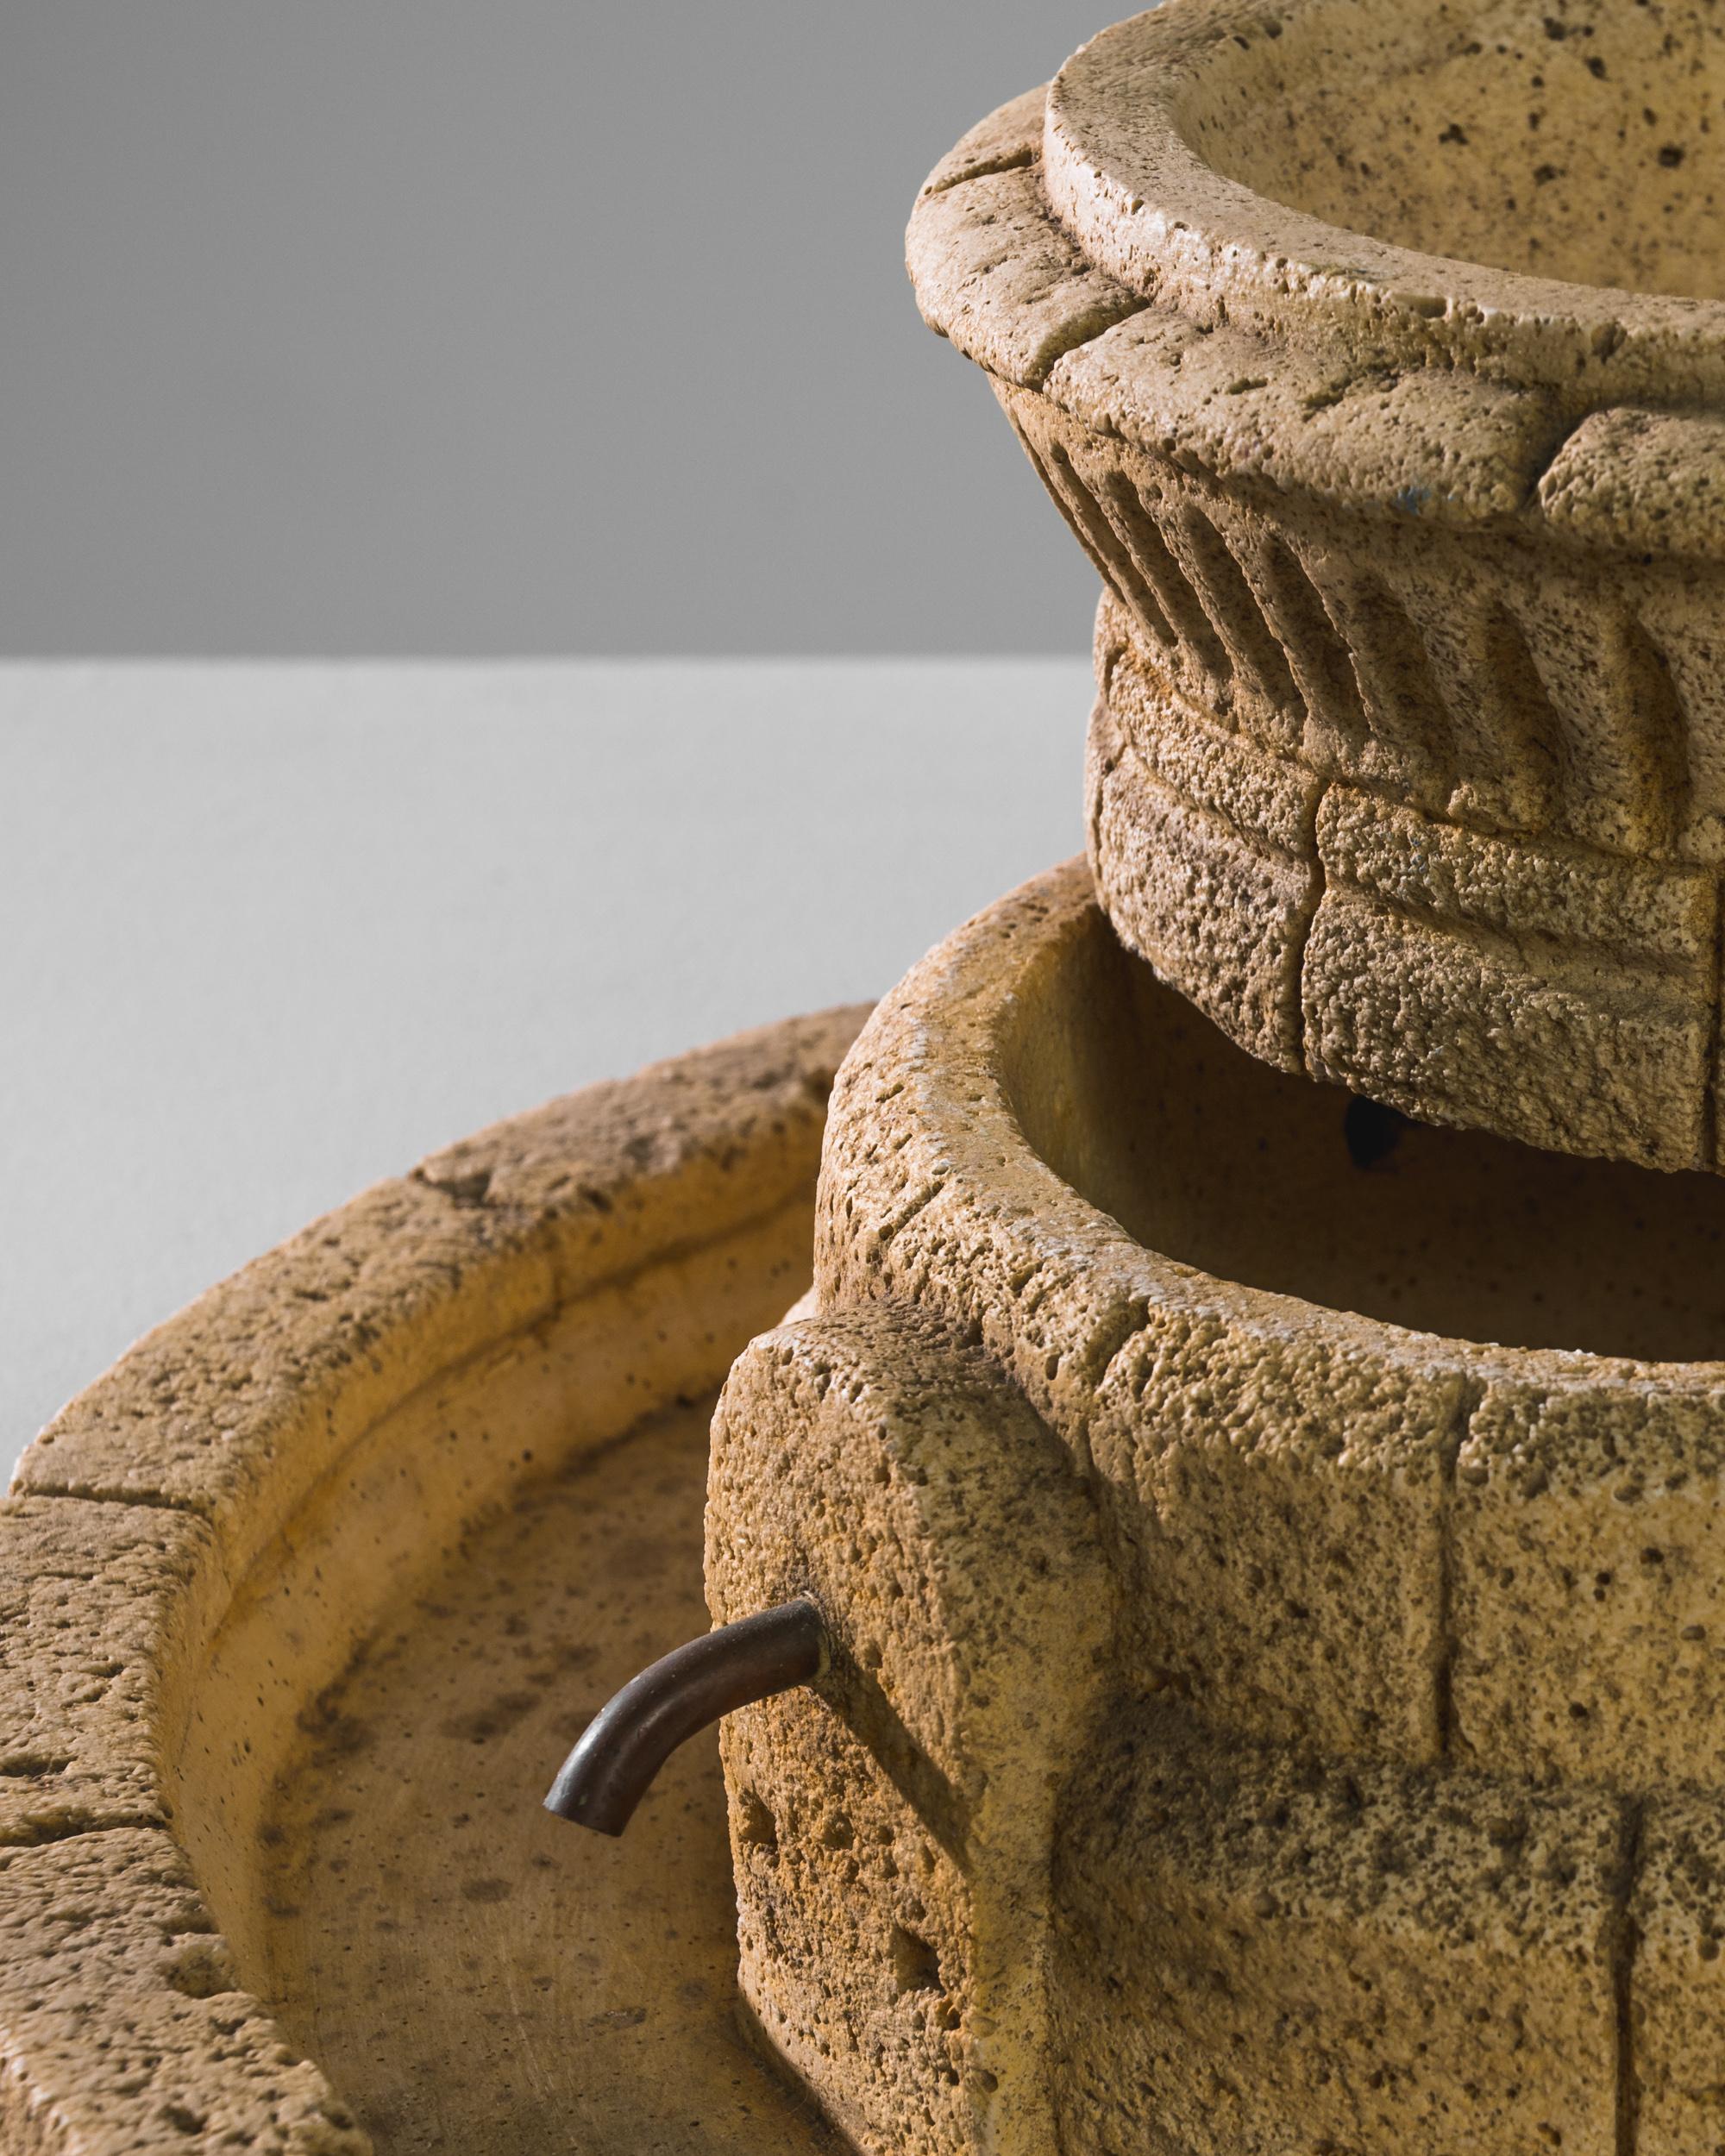 A concrete sculpture from Italy, produced circa 1970. A vintage sculpture formed from concrete shaped in the style of an ancient vase or coliseum. Featuring an open top and four spigots around its circumference, this charming piece appears as a